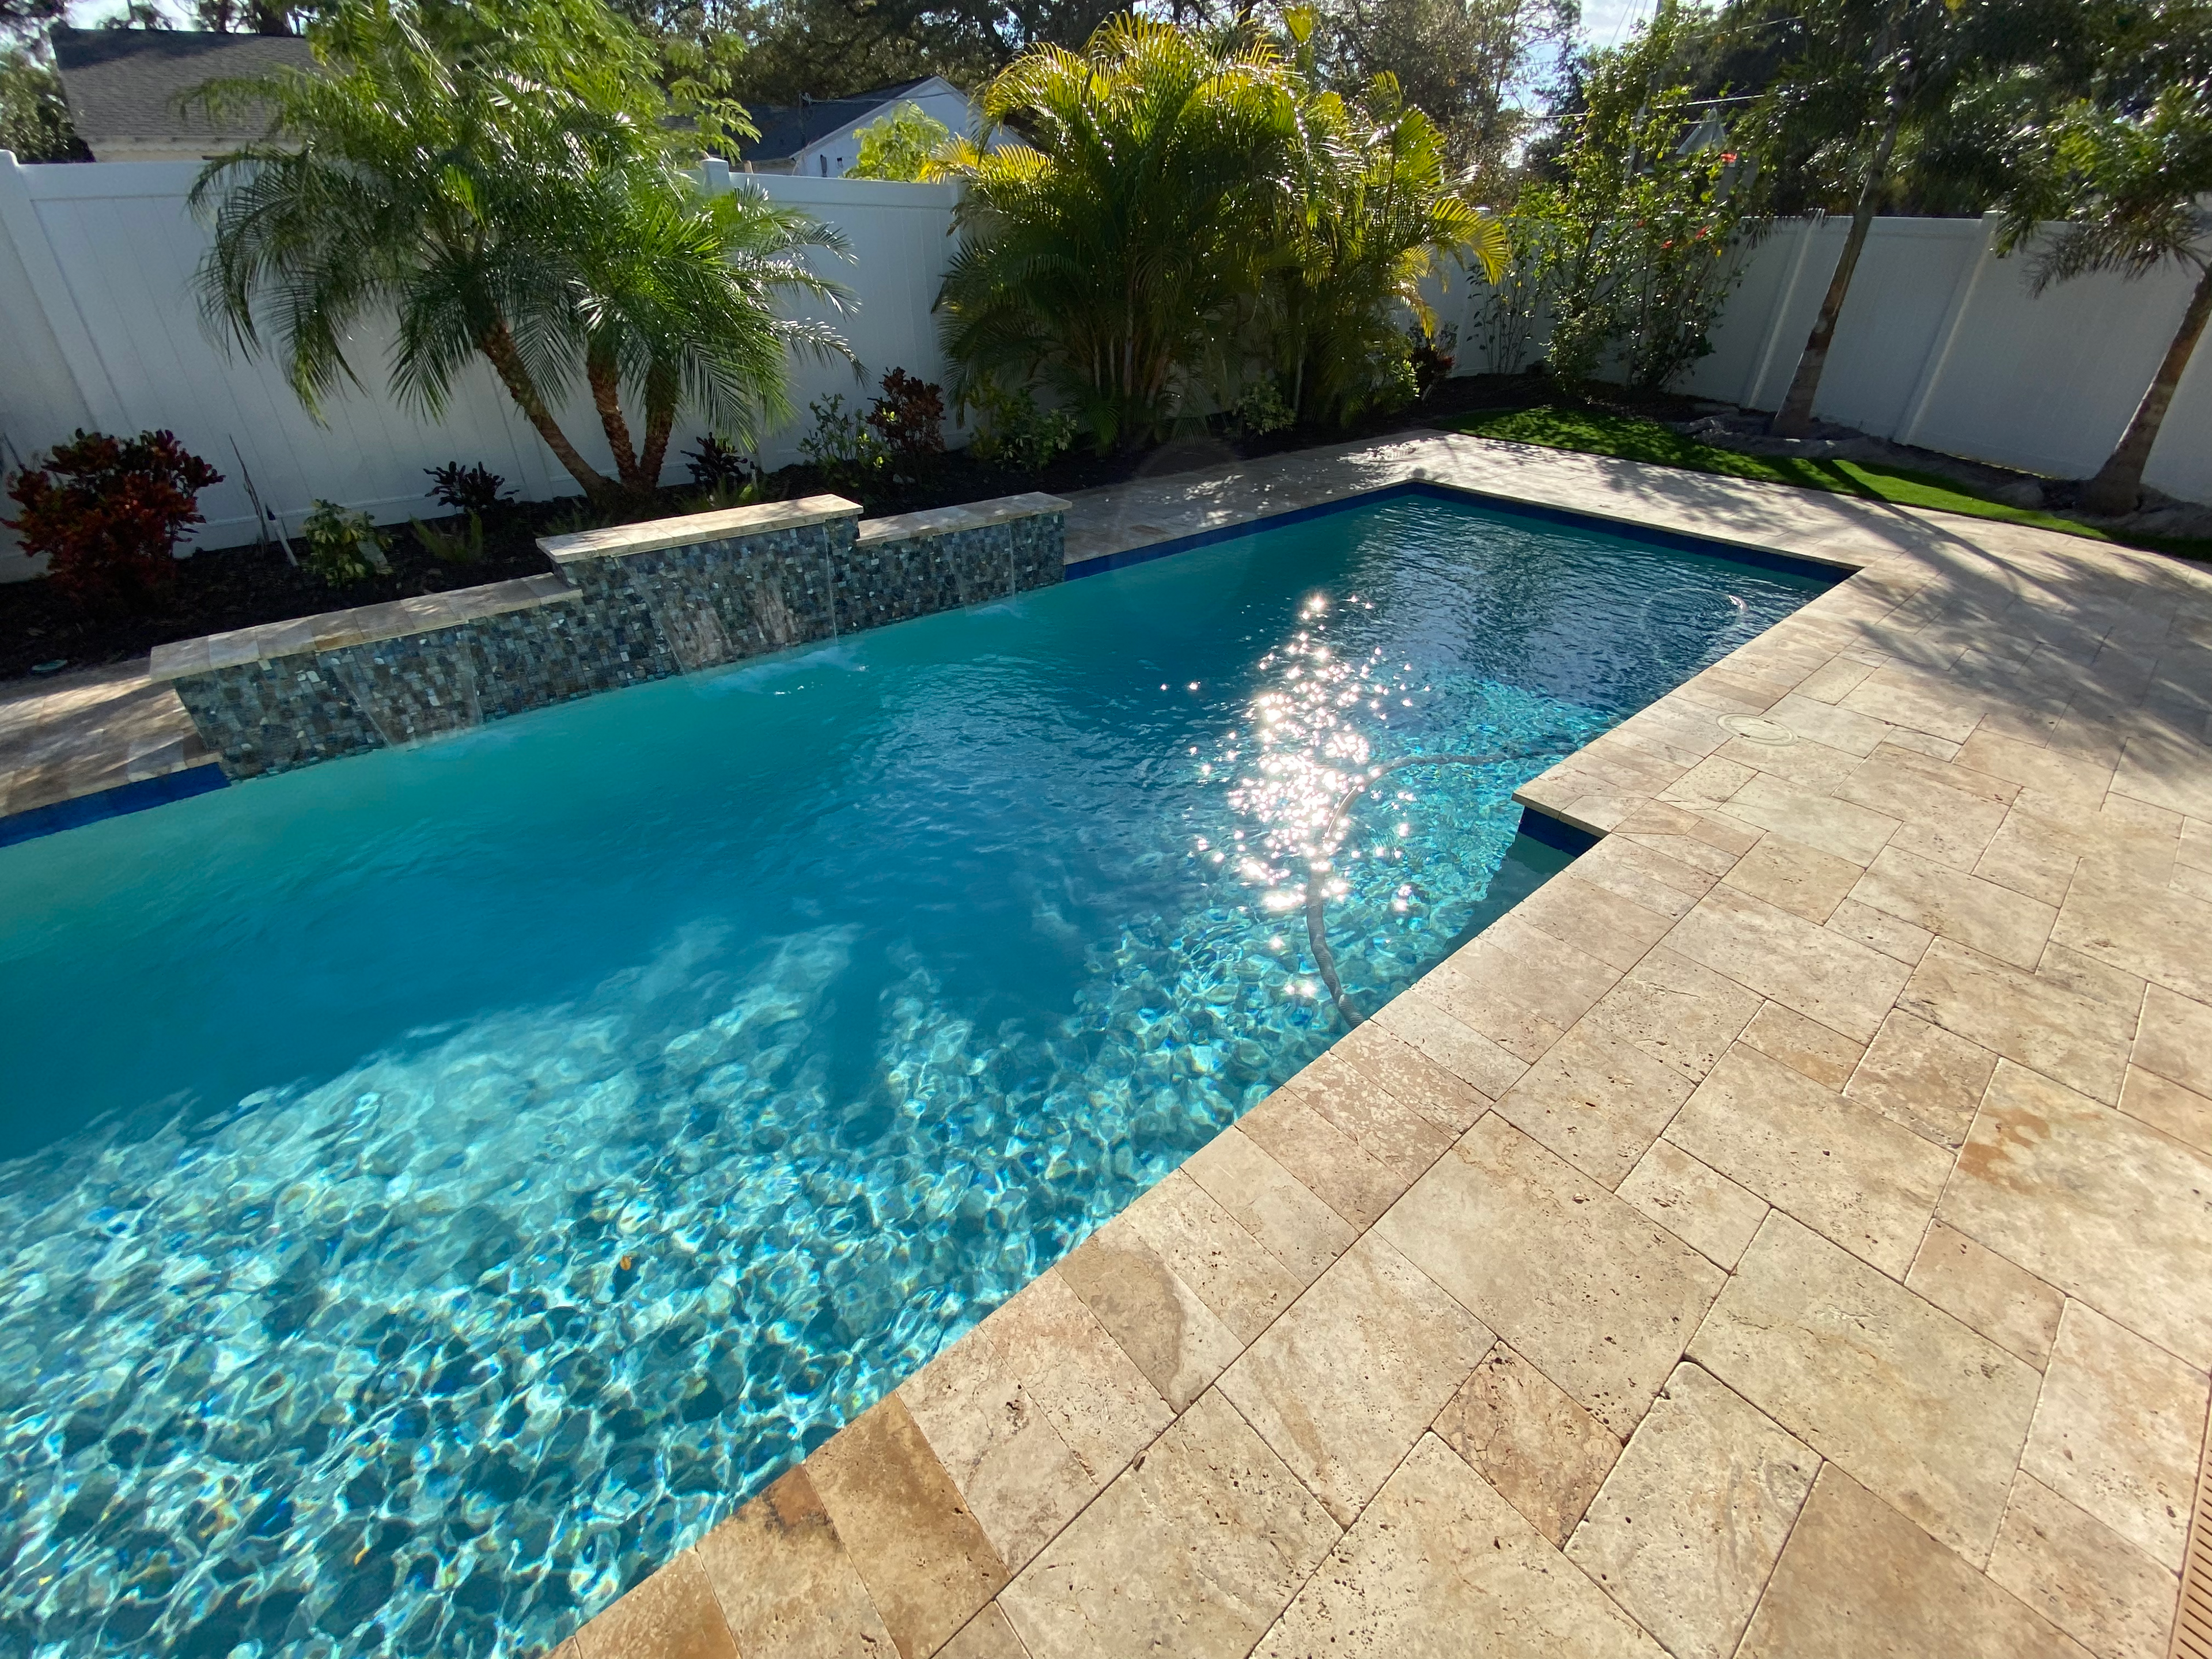 Travertine Pool Deck and Tile Waterfall